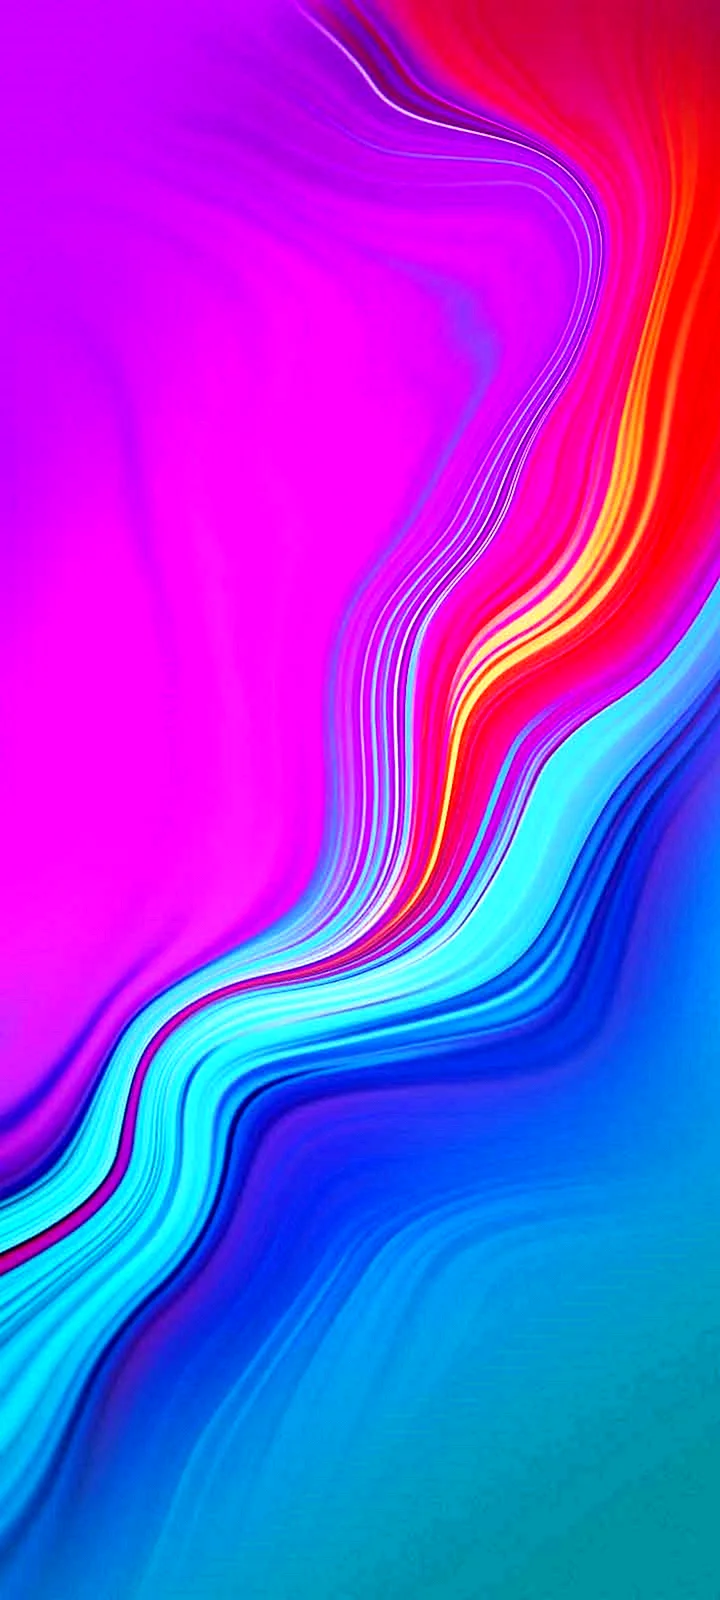 Samsung A31 Wallpaper For iPhone